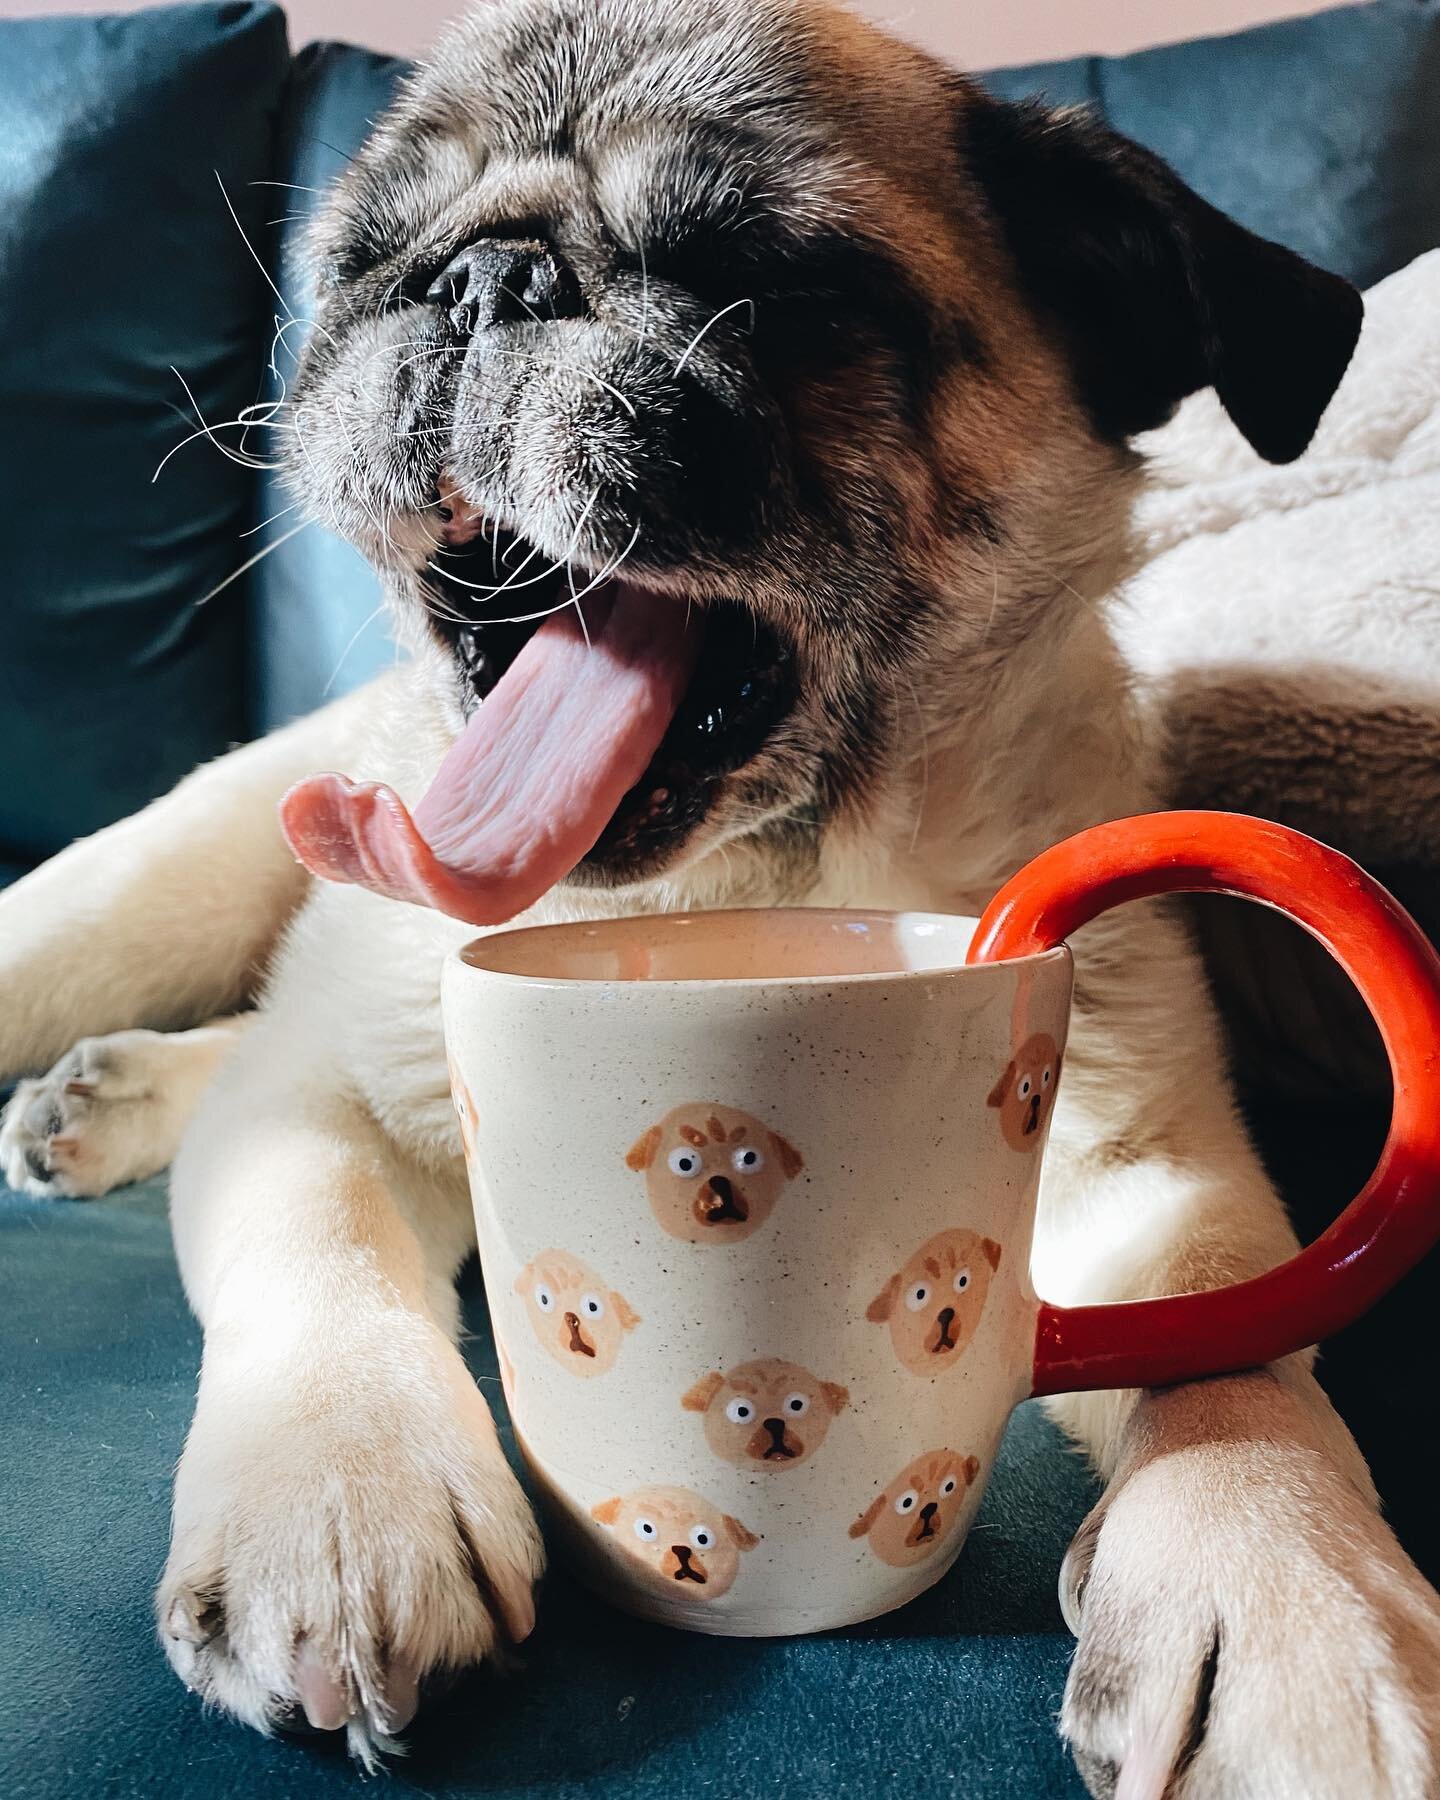 The best part of waking up, is coffee in your pug cup! ✨